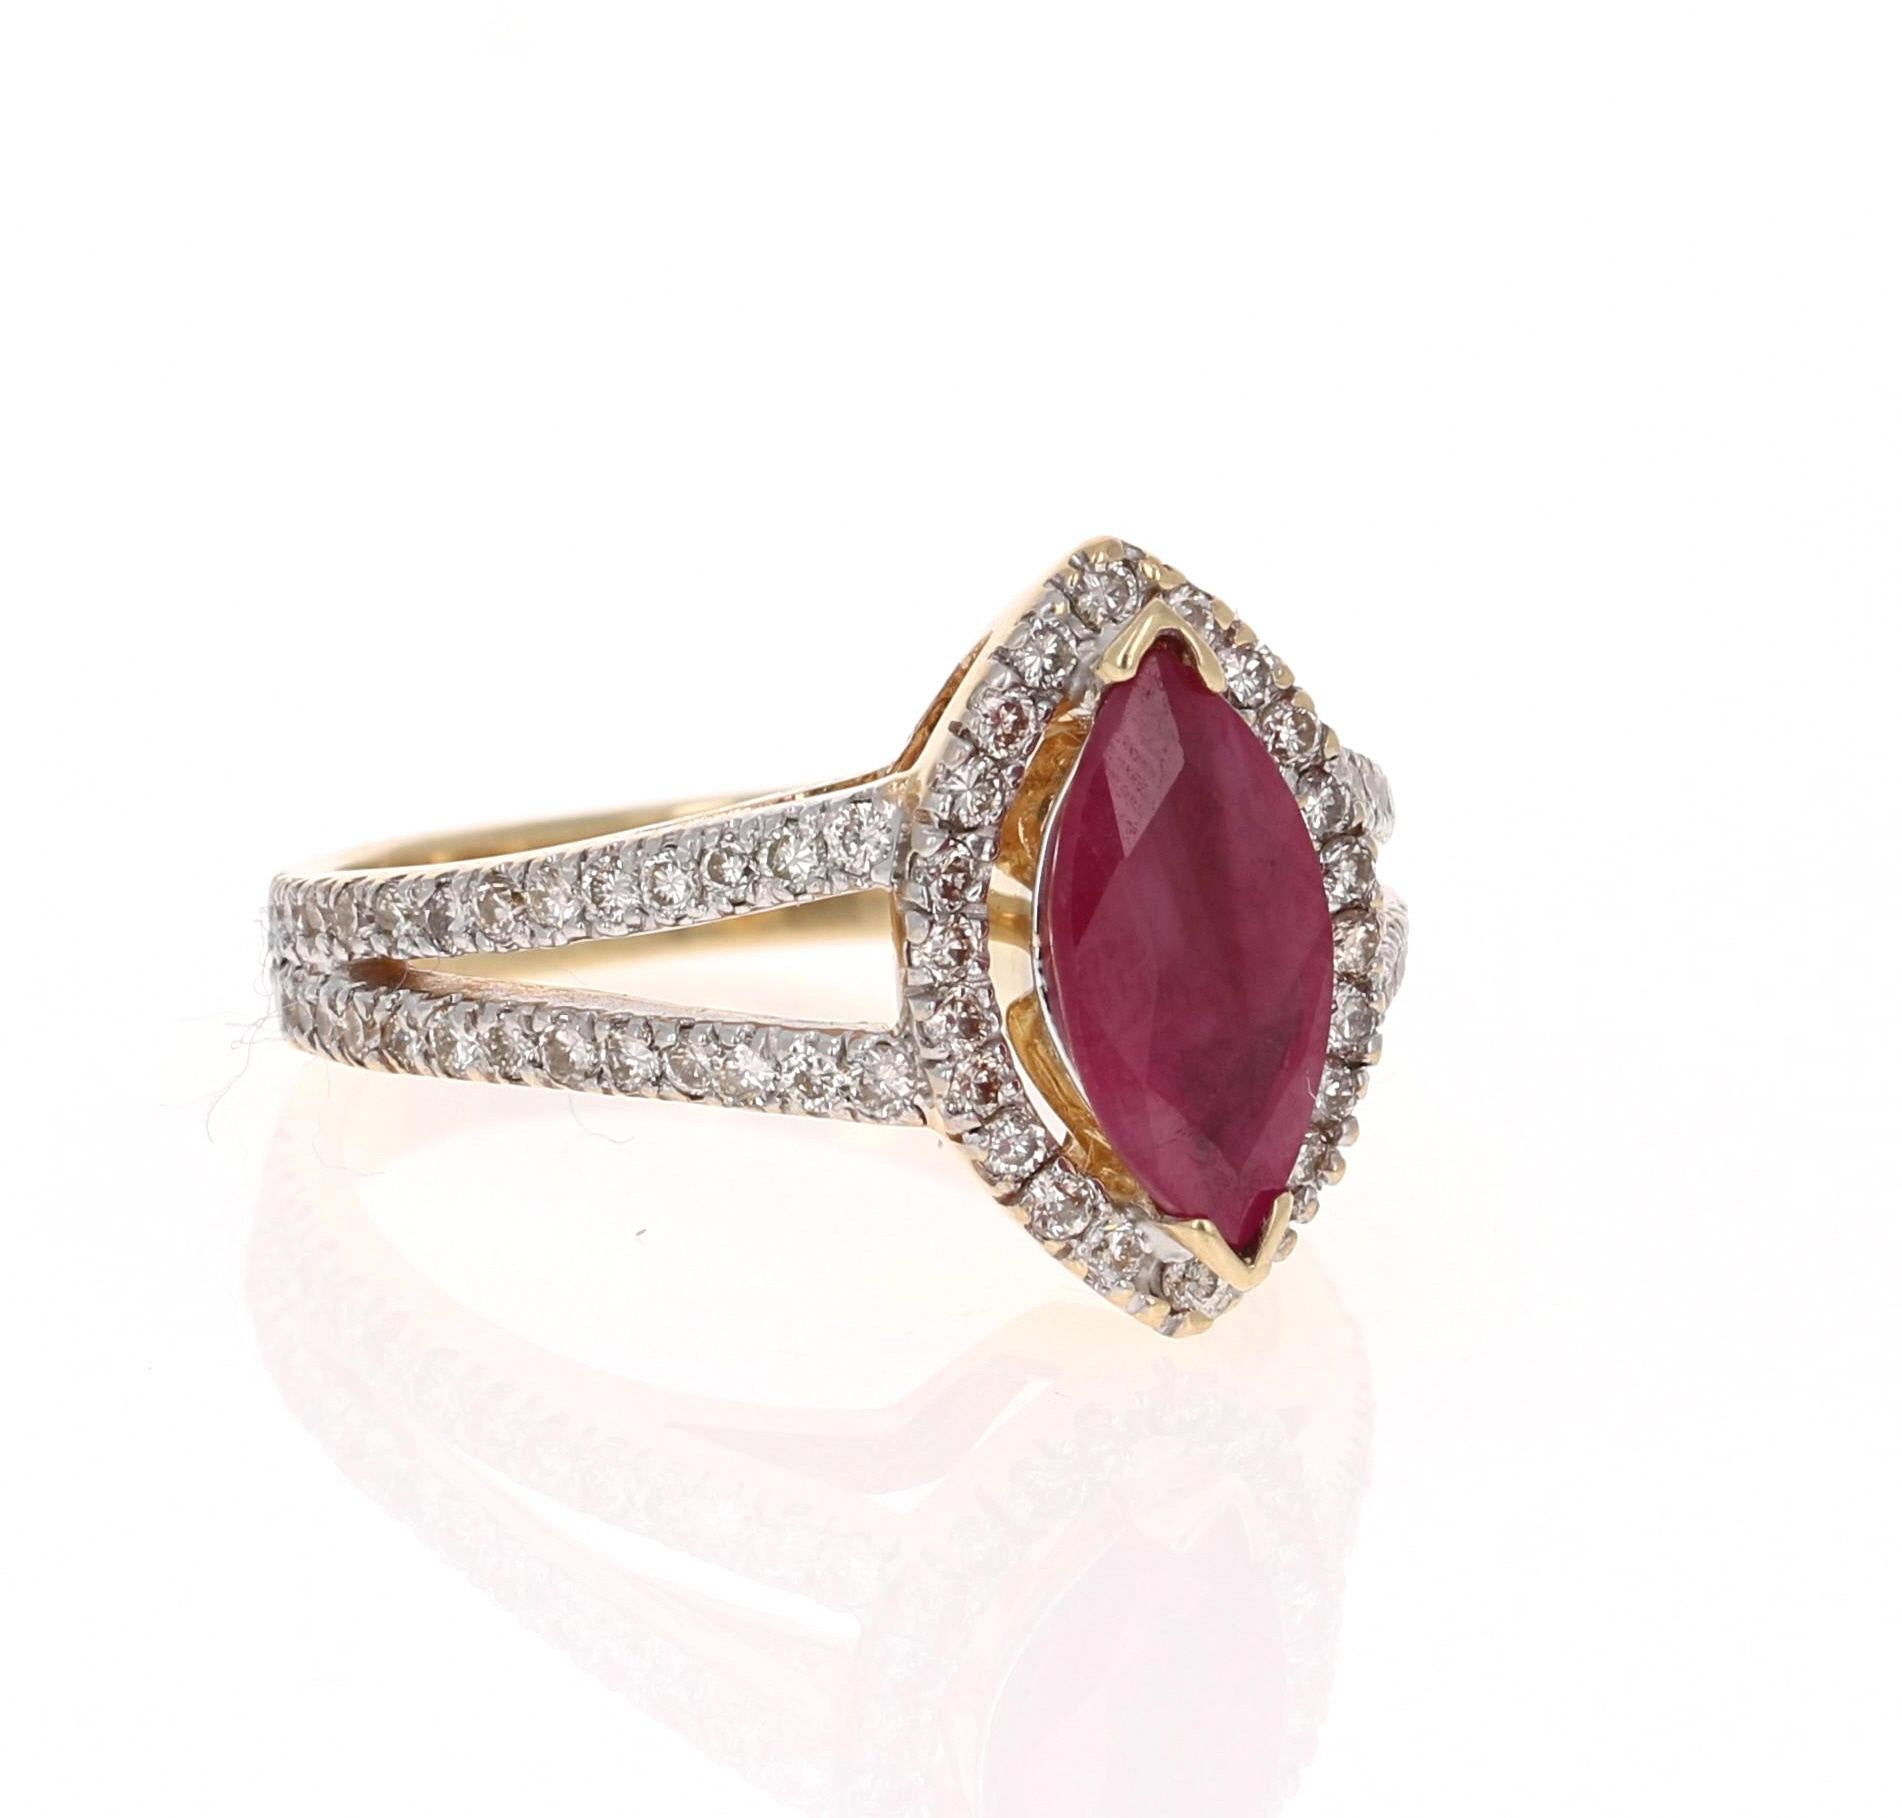 This is simply a beautiful Marquise Cut Ruby and Diamond ring. The Marquise Cut Ruby measures at 6 mm x 12 mm and weighs 1.52 Carats. It is surrounded by 78 Round Cut Diamonds that weigh 0.70 Carats. (Clarity: VS, Color: H) The total carat weight of